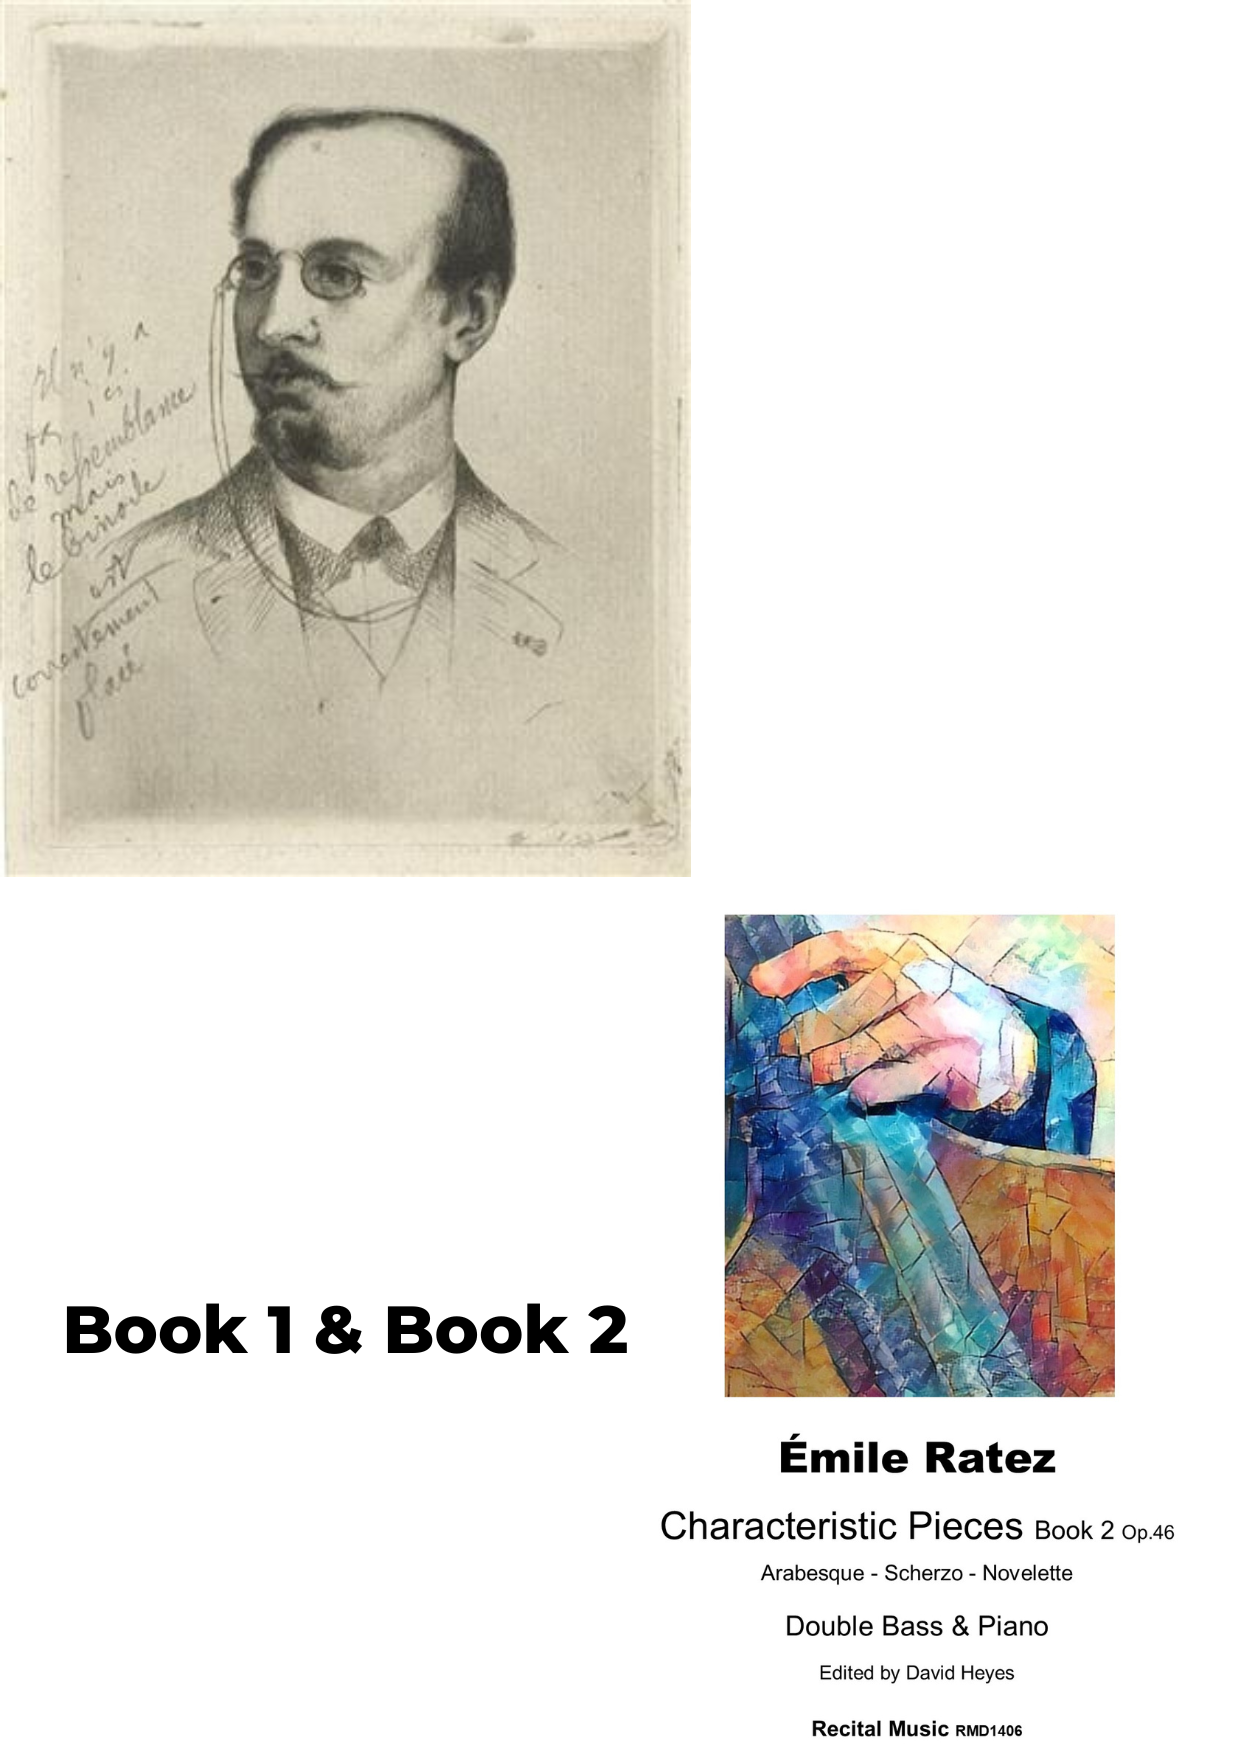 Émile Ratez: Characteristic Pieces Book 1 and 2 for double bass & piano